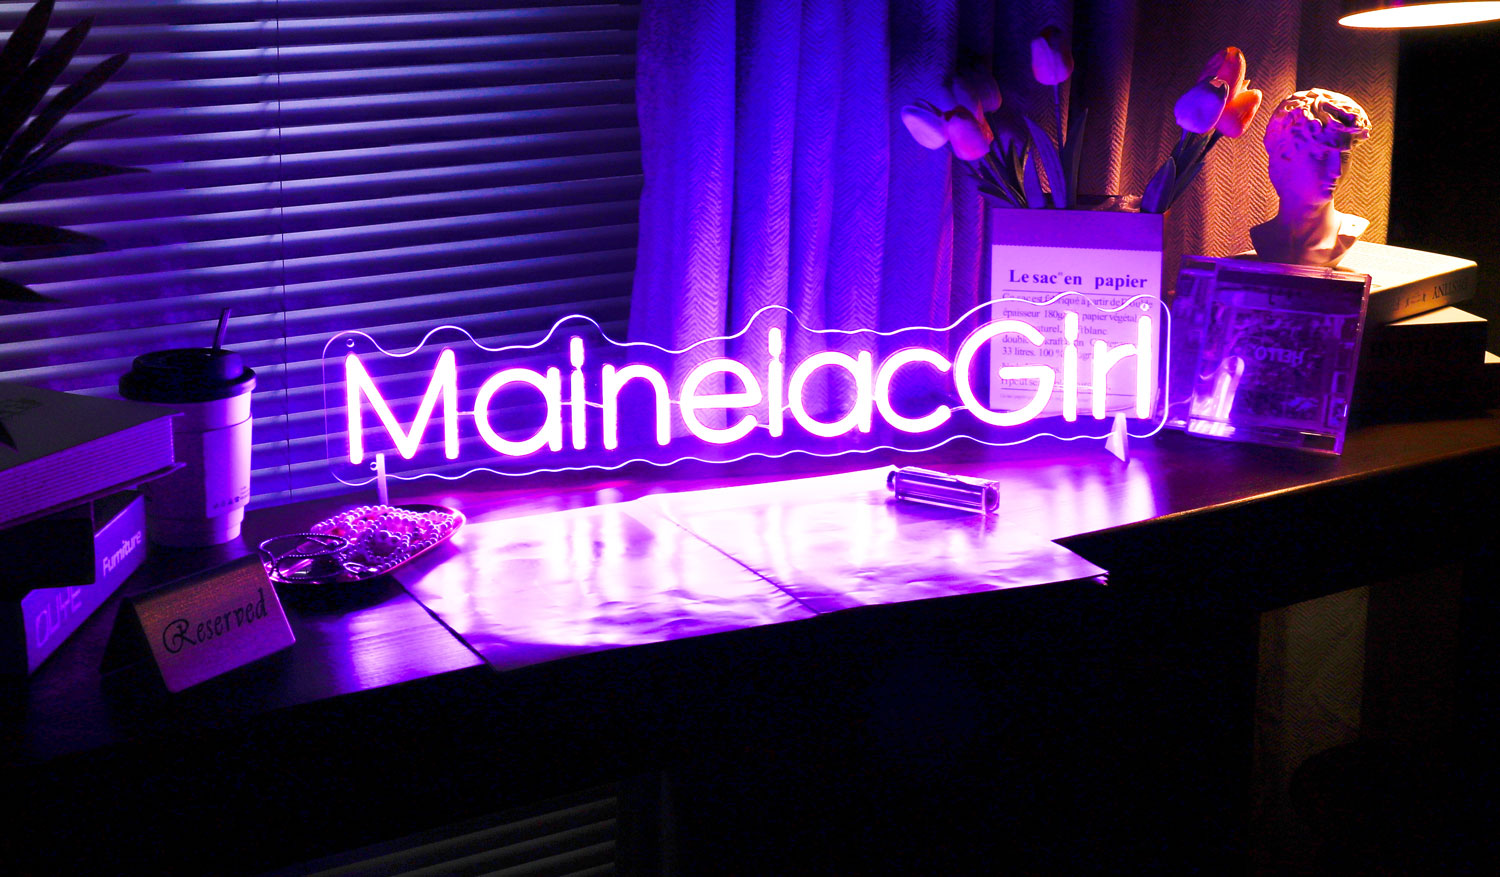 stand neon sign in neon purple